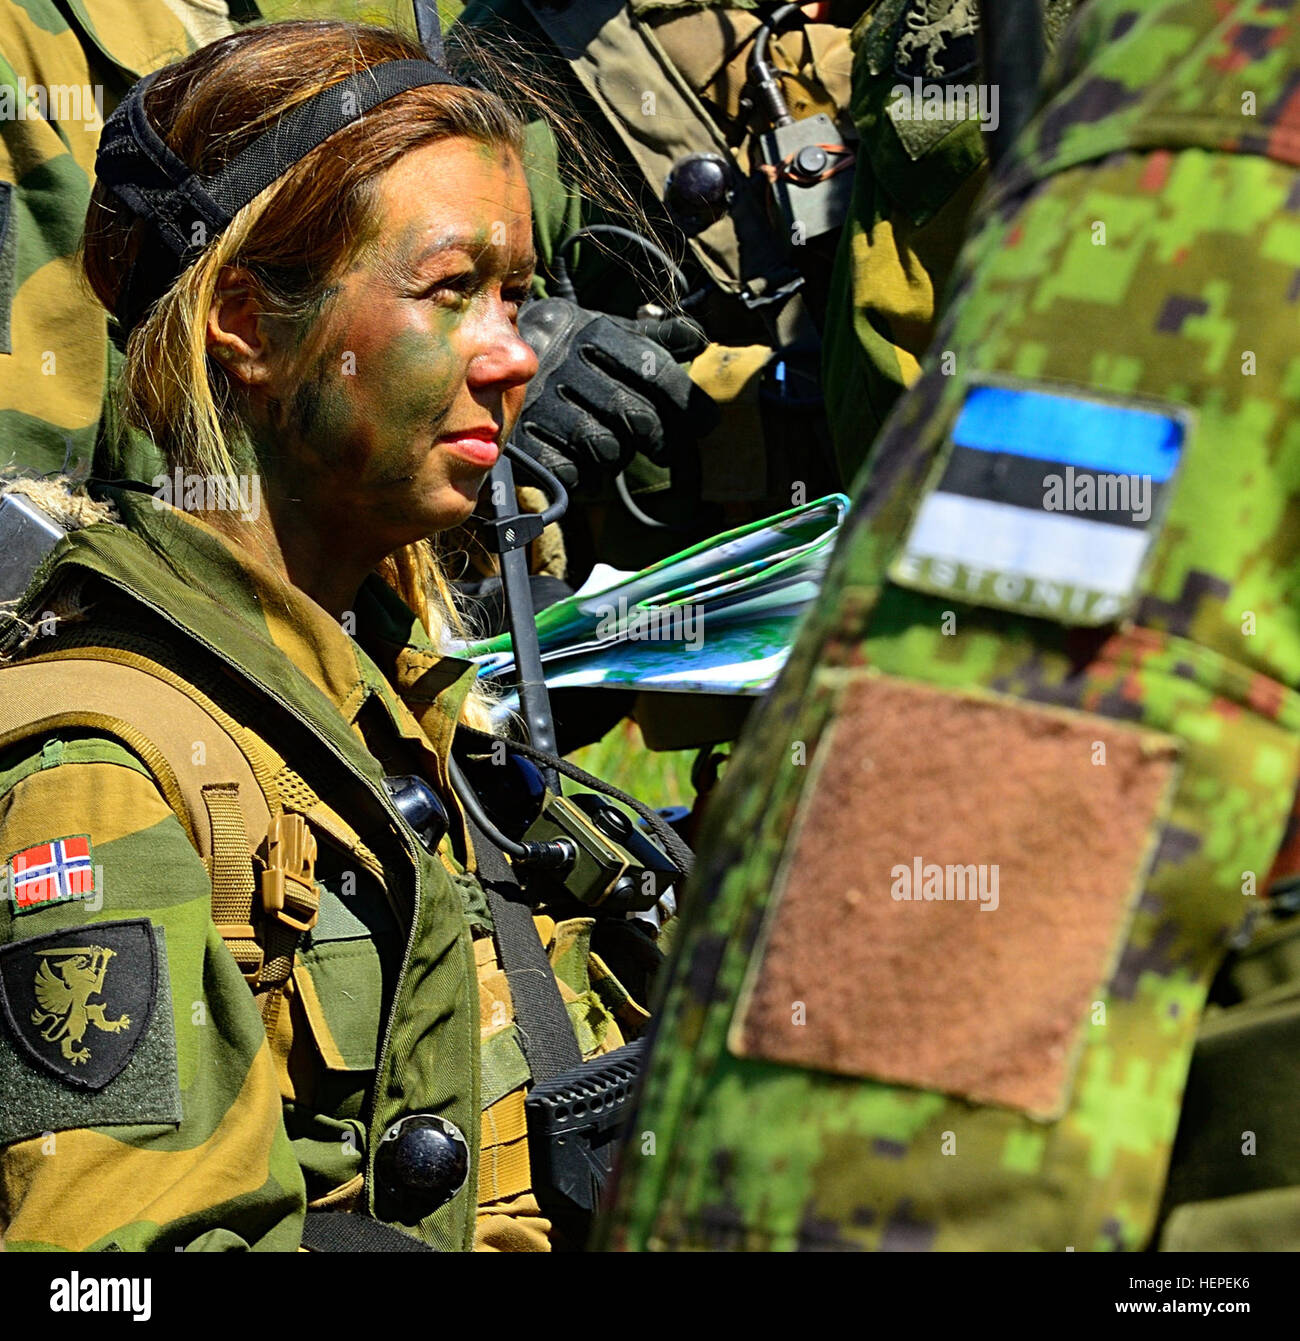 Soldiers from the Norwegian Army’s 2nd Infantry Battalion and the Estonian Land Forces‘ Kuperjan conduct an after-action review following a situational training exercise during the Saber Strike 2015 Distinguished Vistor Day, held in Adazi, Latvia, June 10. Saber Strike is a long-standing U.S. Army Europe-led cooperative training exercise. This year’s exercise objectives facilitate cooperation amongst the U.S., Estonia, Latvia, Lithuania, and Poland to improve joint operational capability in a range of missions as well as preparing the participating nations and units to support multinational co Stock Photo